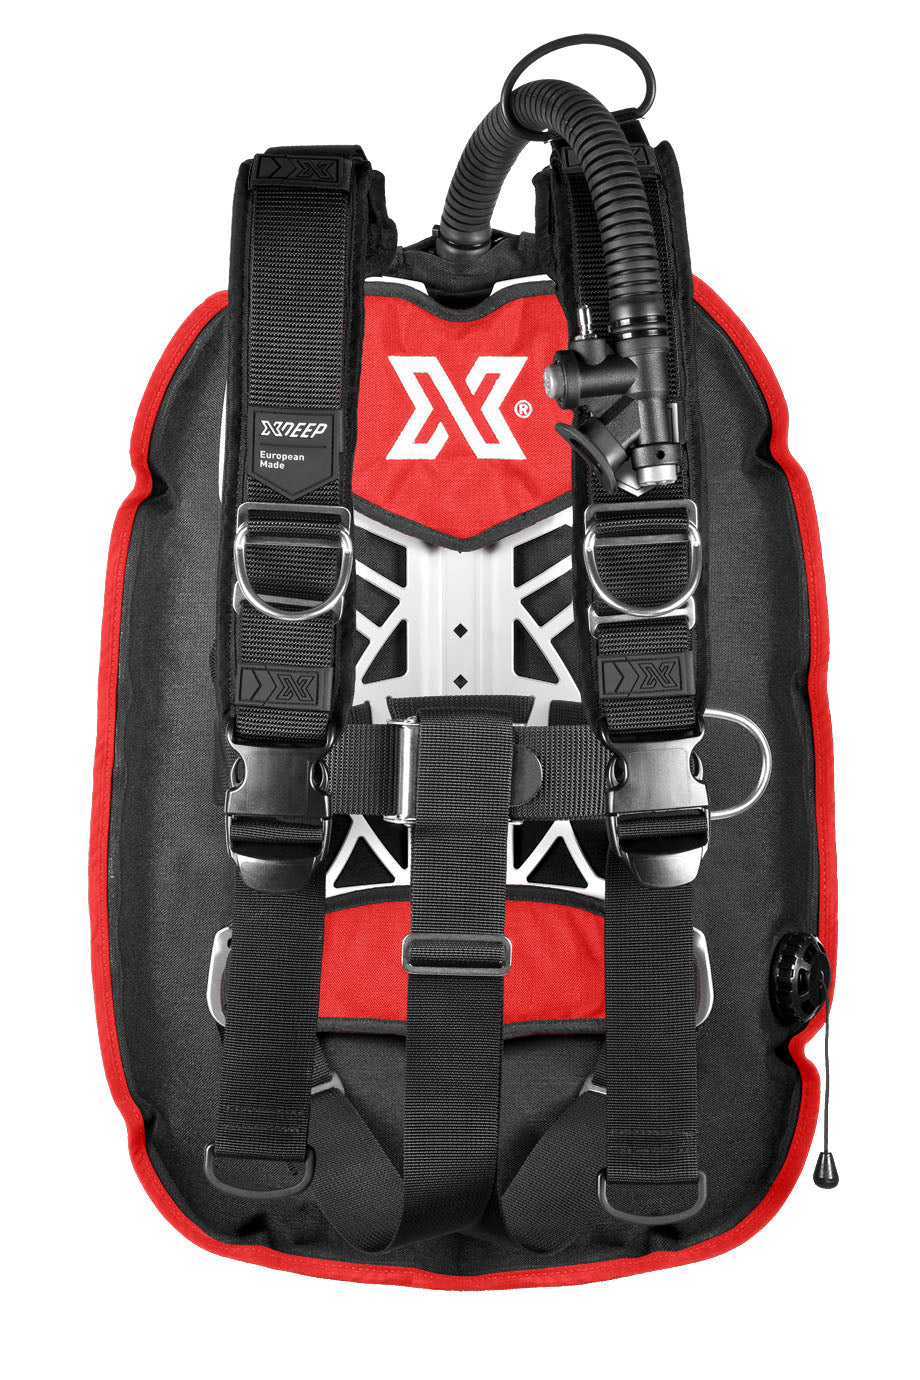 XDEEP XDEEP GHOST Full Setup with Standard or Deluxe harness Red / Deluxe / Small - Oyster Diving